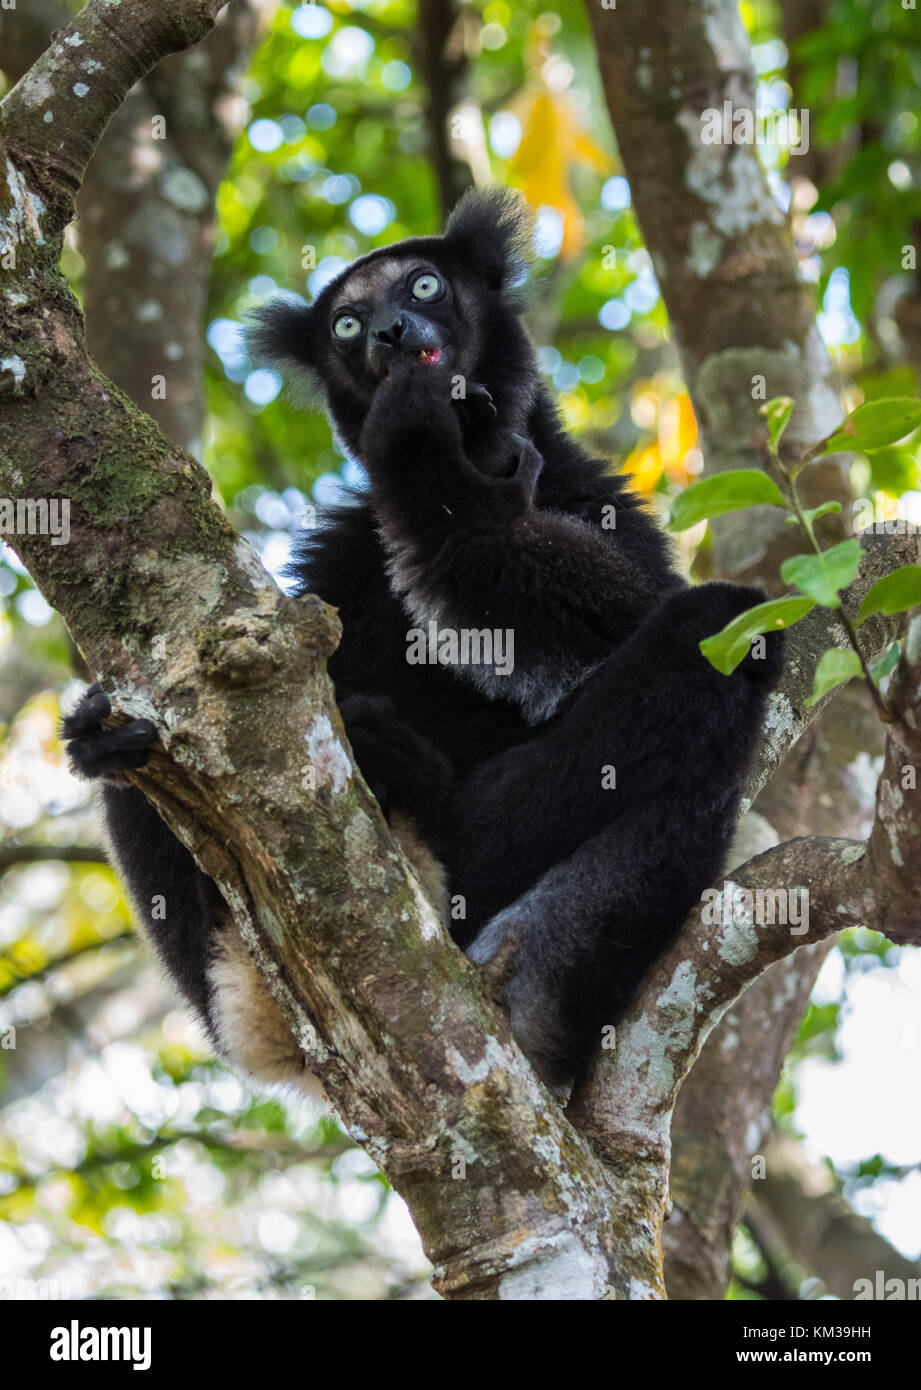 Indri (Indri Indri), the largest of all lemurs, is native to Madagascar, Africa. Stock Photo